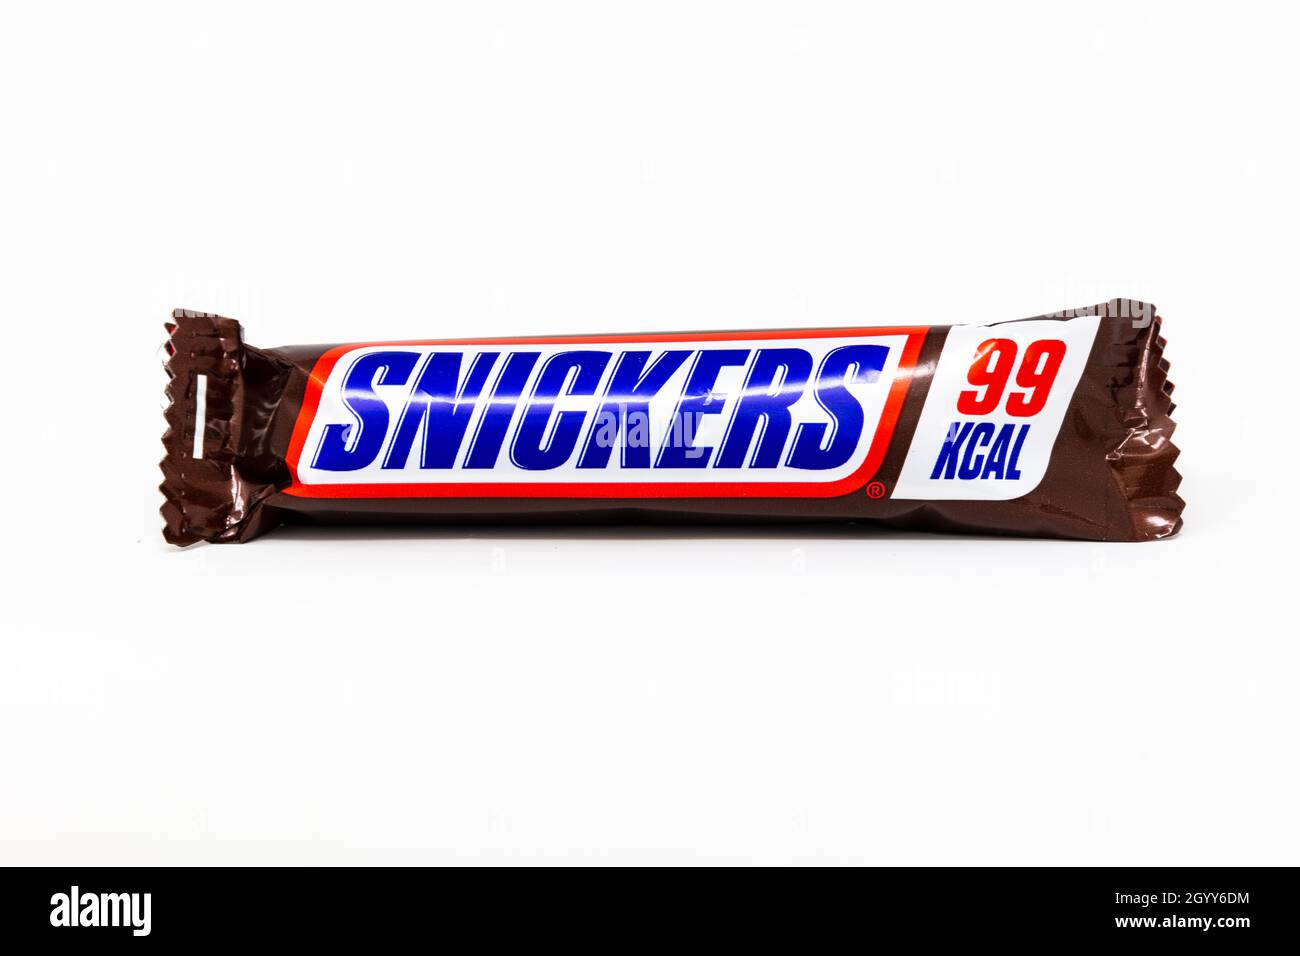 Snickers 99kcal Chocolate Snack Bar Foto de stock